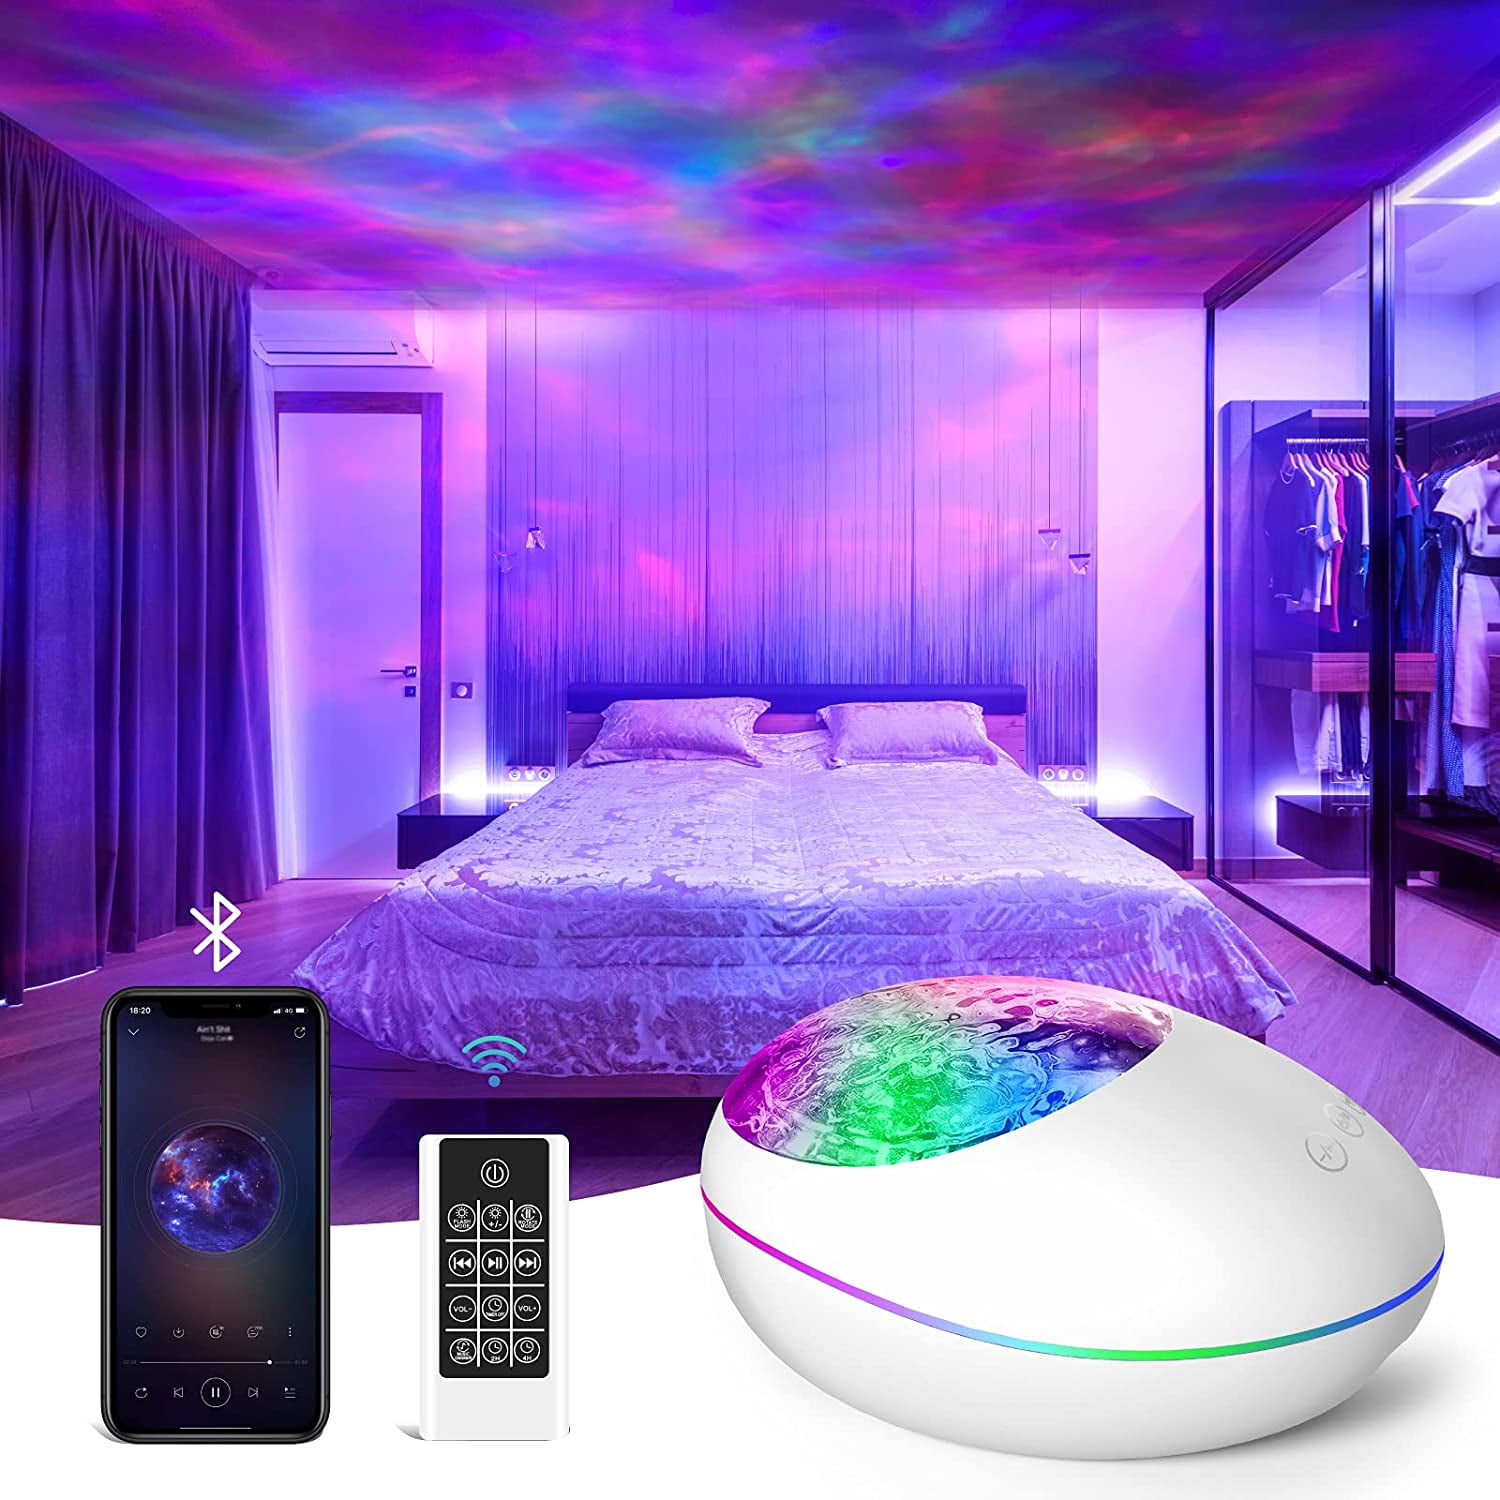 Galaxy Projector Light for Bedroom,White Noise Night Light Projector Remote Projector Light,Bluetooth Music Galaxy Light Led Projector Room Decor,Ceiling Projector Light for Kids Adult Birthday Gifts 